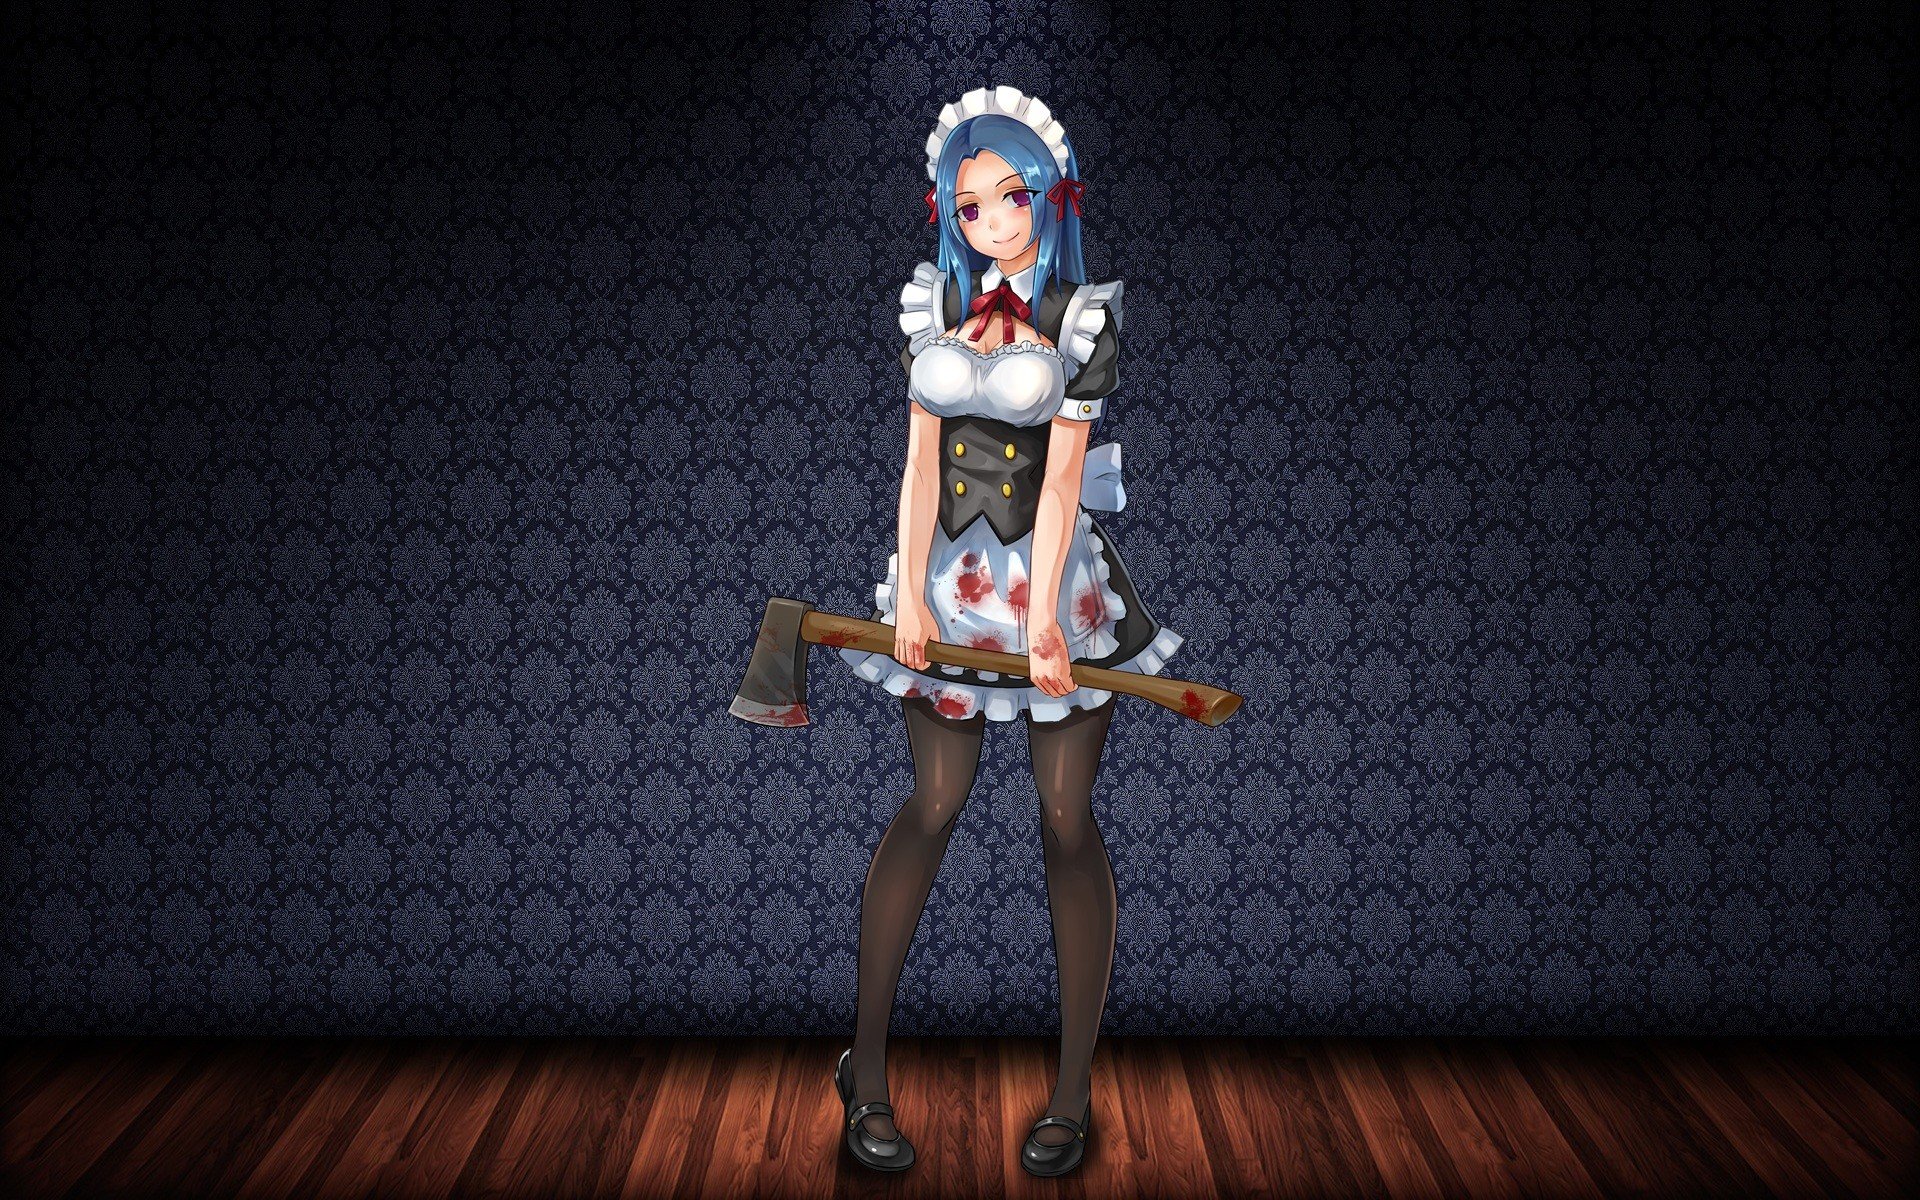 anime, Blood, Anime girls, Axes, Maid outfit, Red eyes, Blue hair